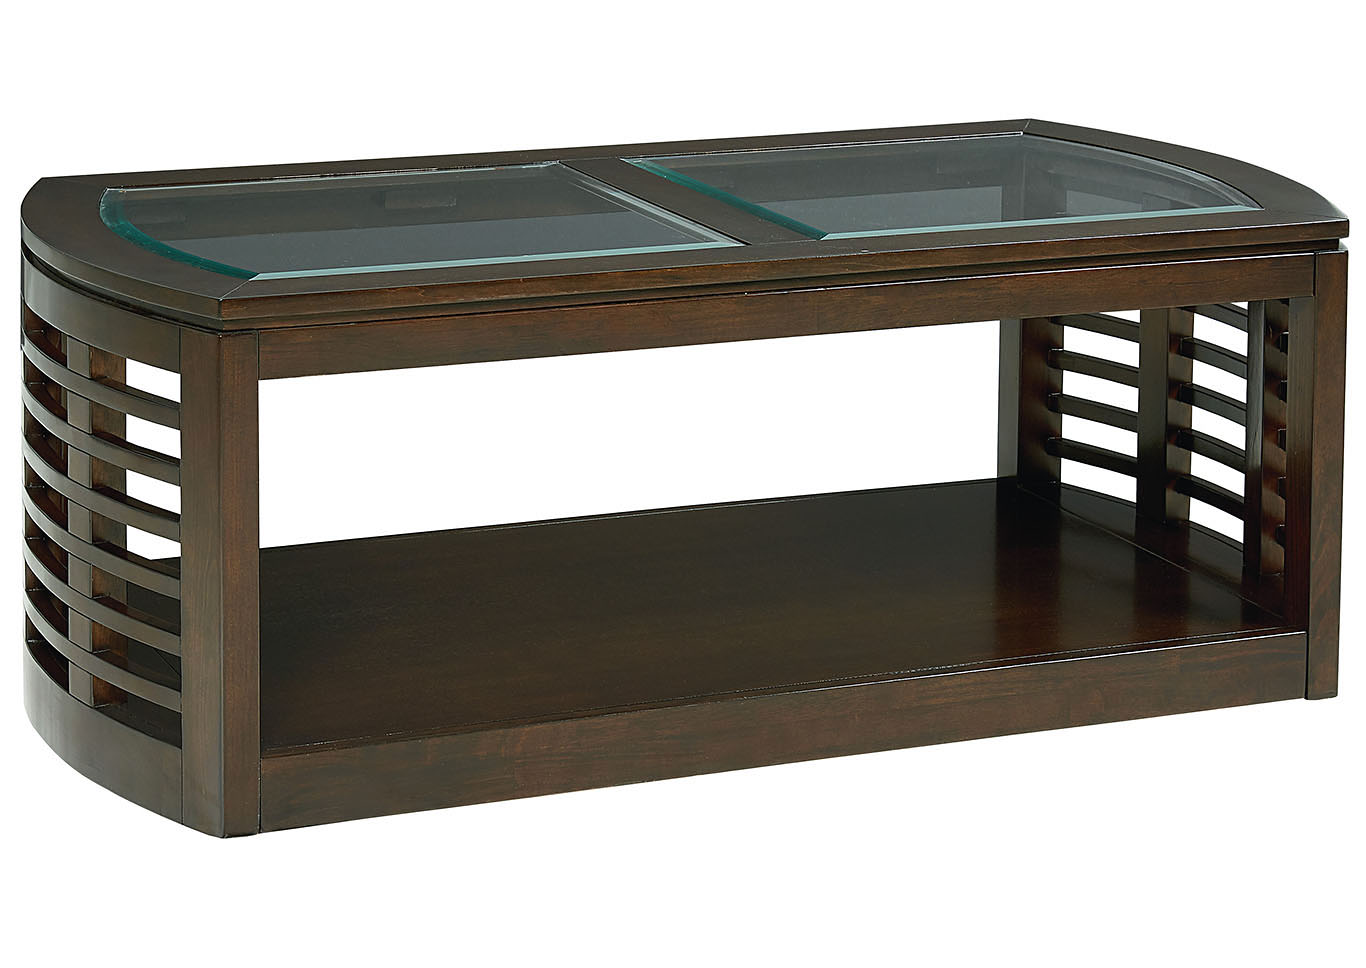 Accolade Cocktail Table,Standard